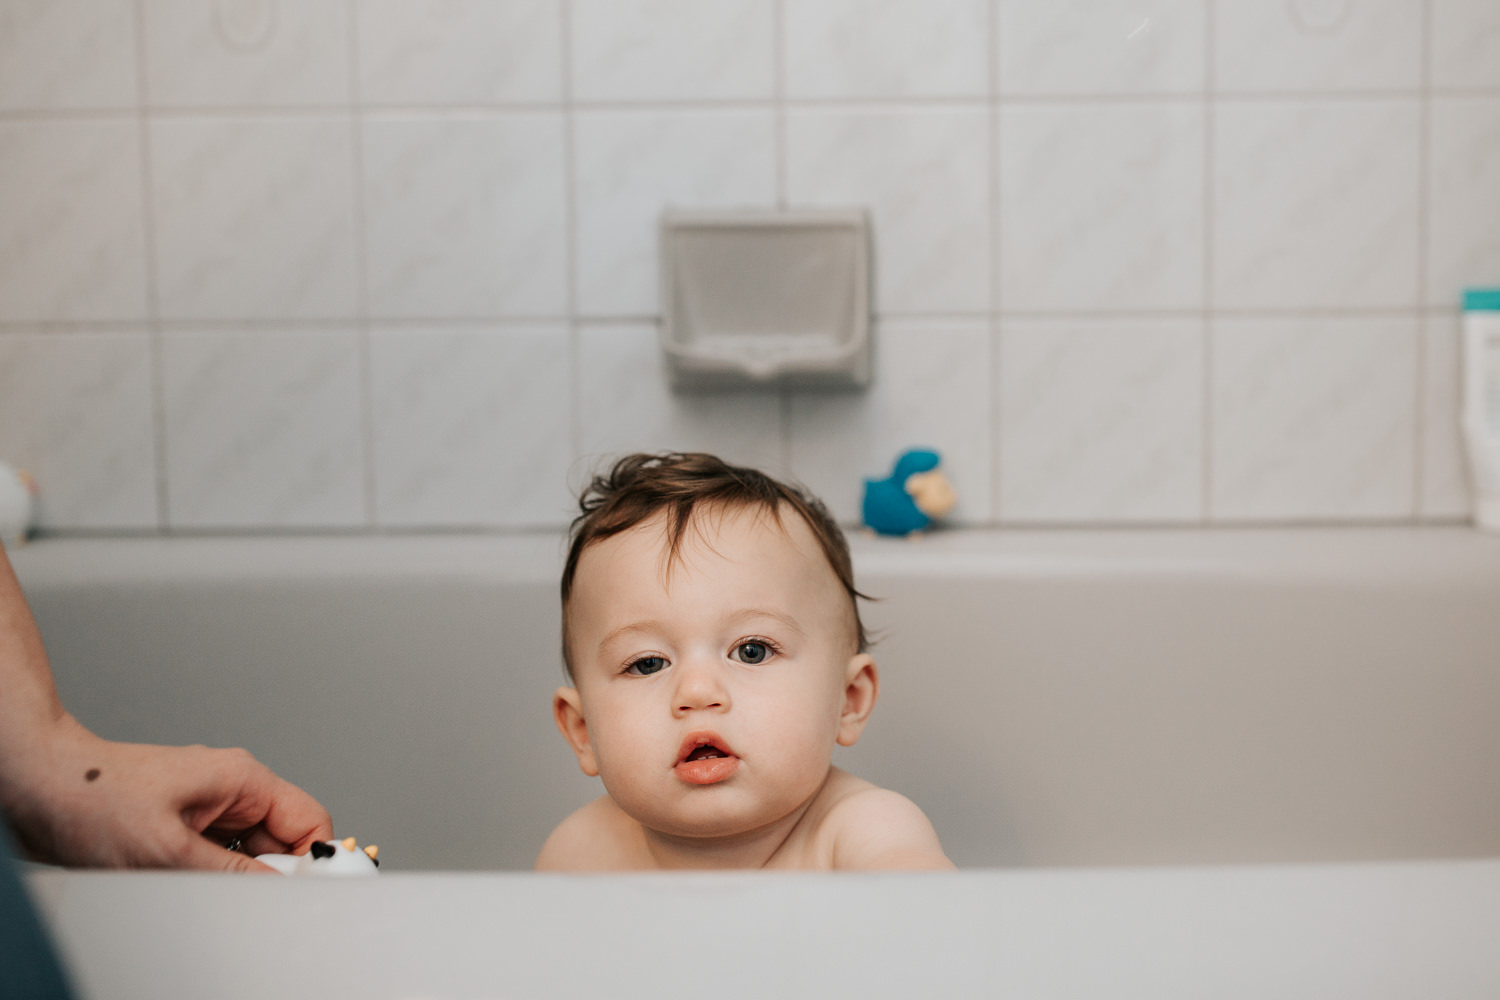 9 month old baby boy with dark hair and blue eyes sitting in bathtub looking at camera - Barrie Golden Hour Photos